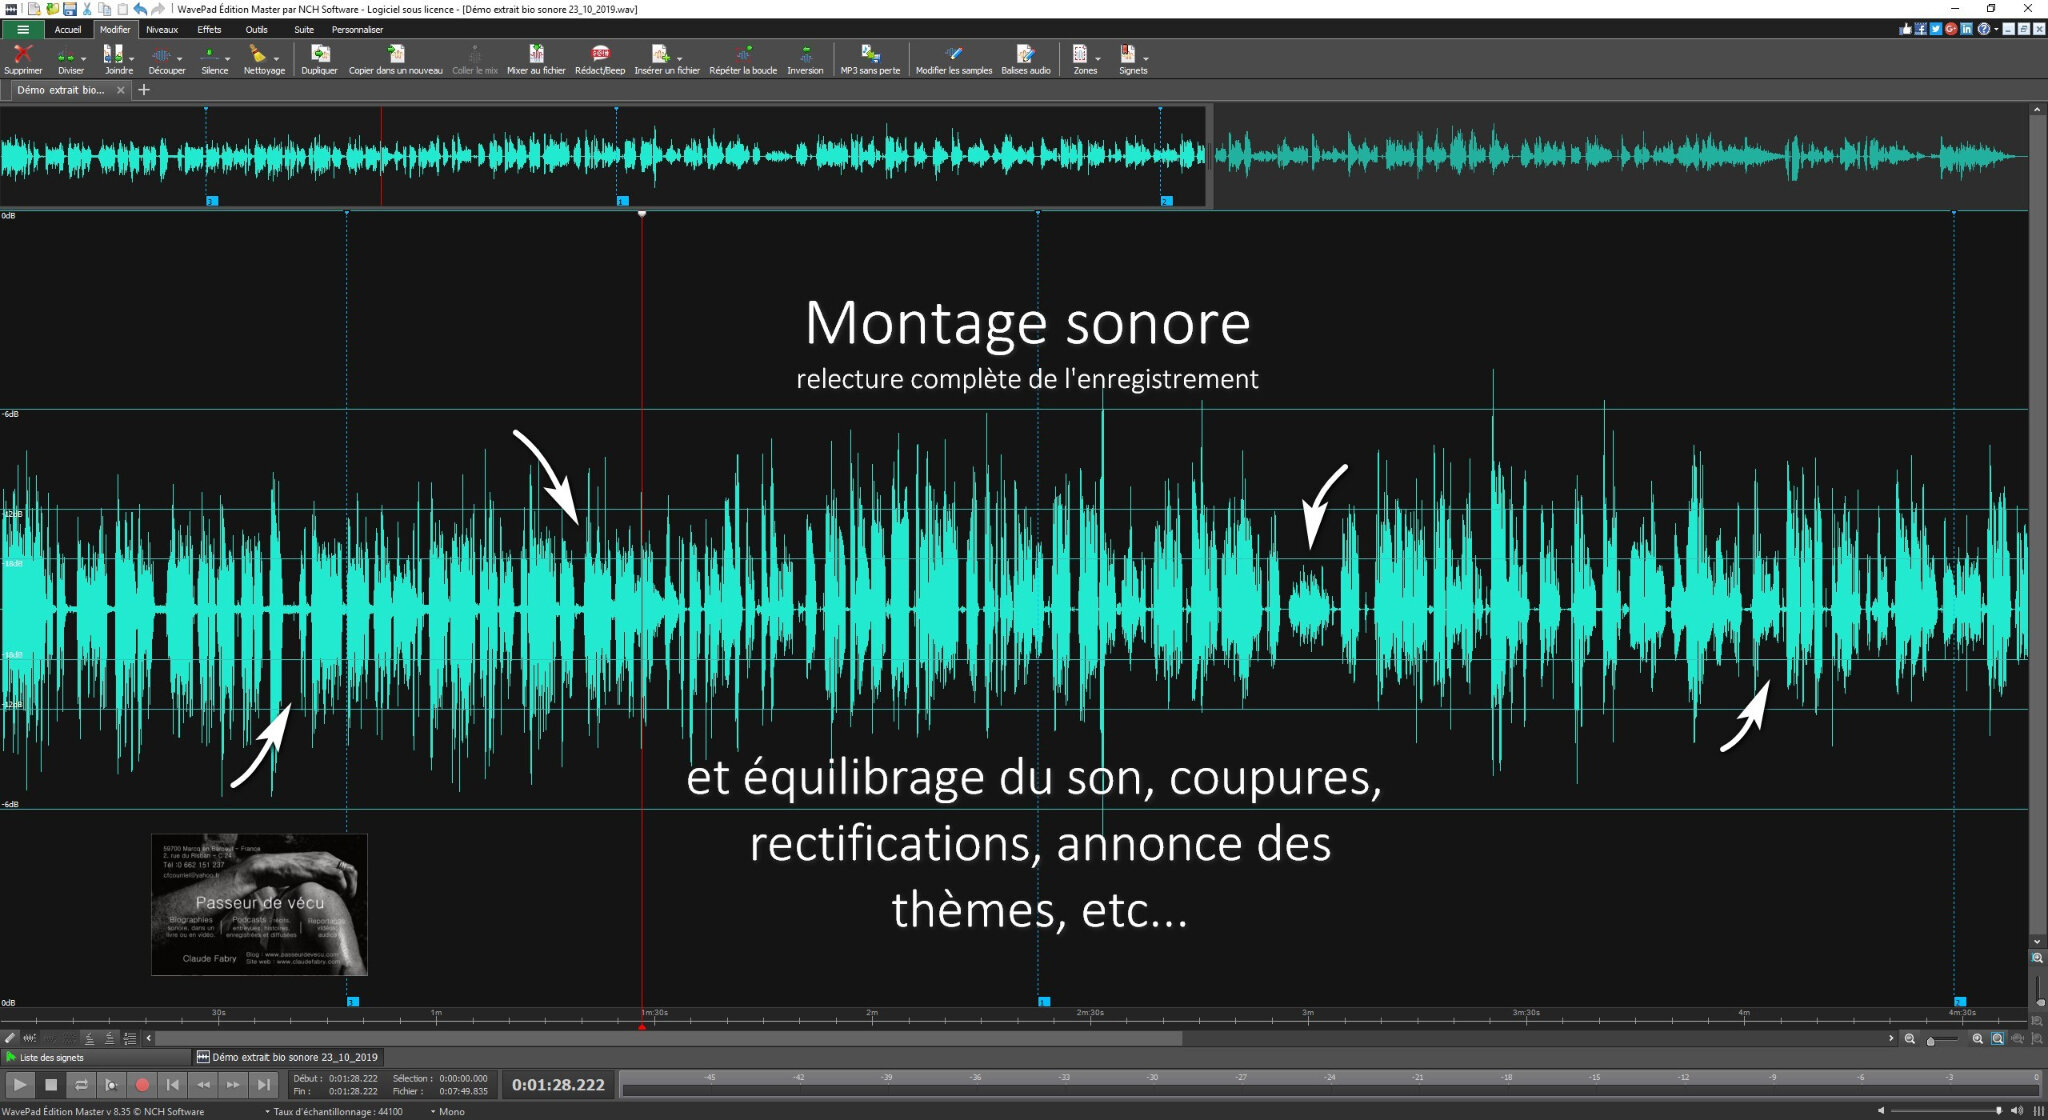 Montage sonore